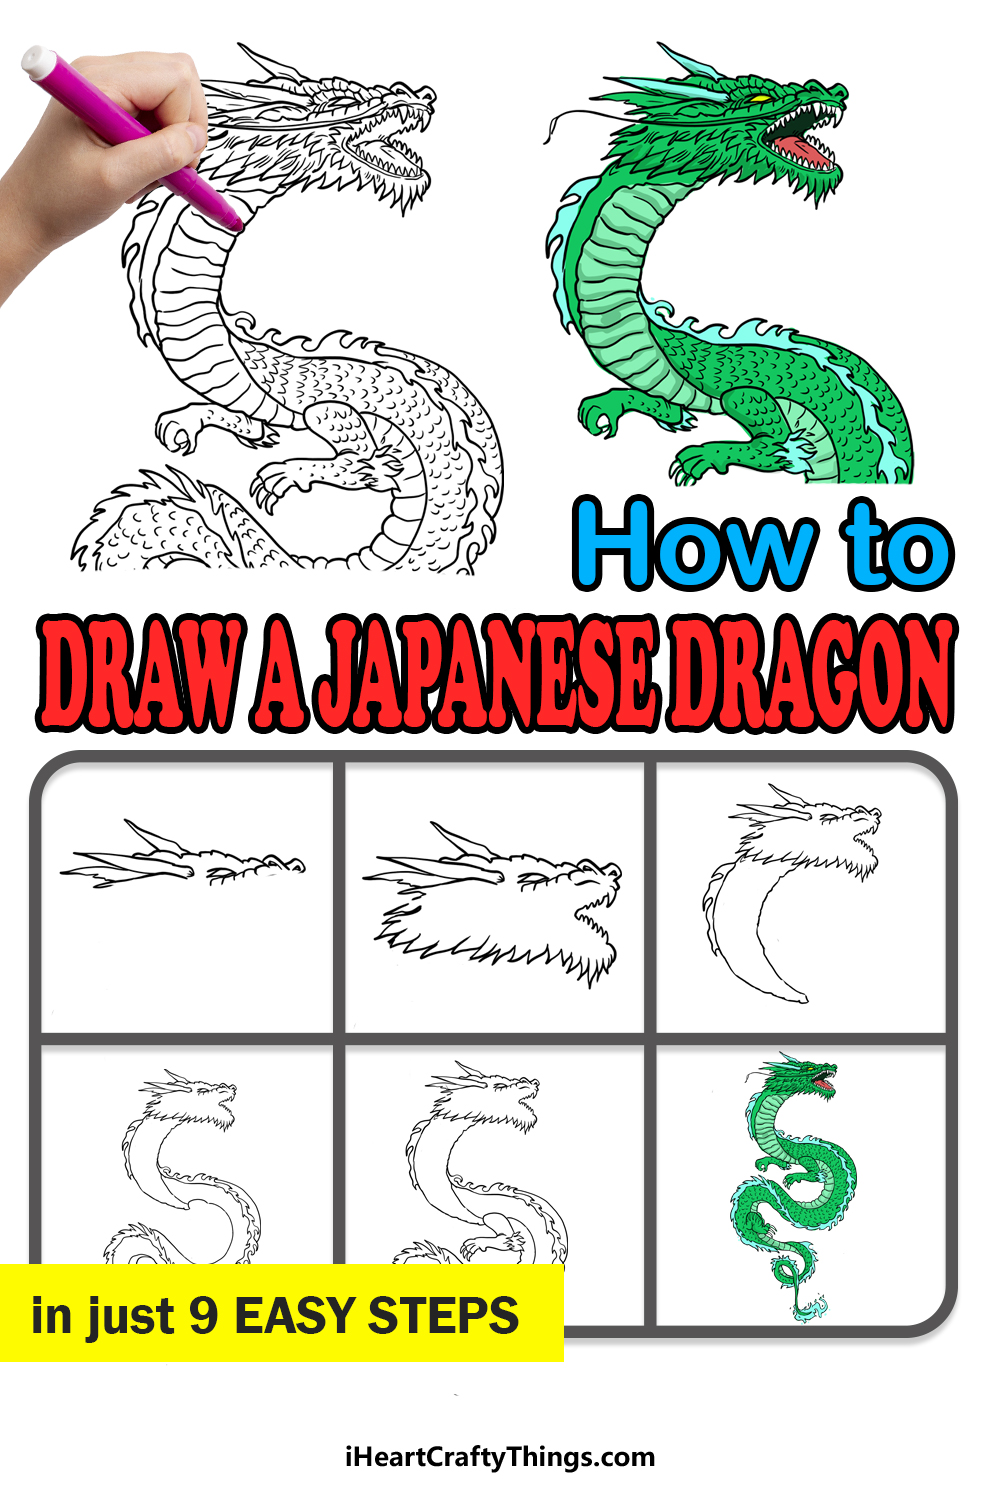 How to Draw A Japanese Dragon step by step guide